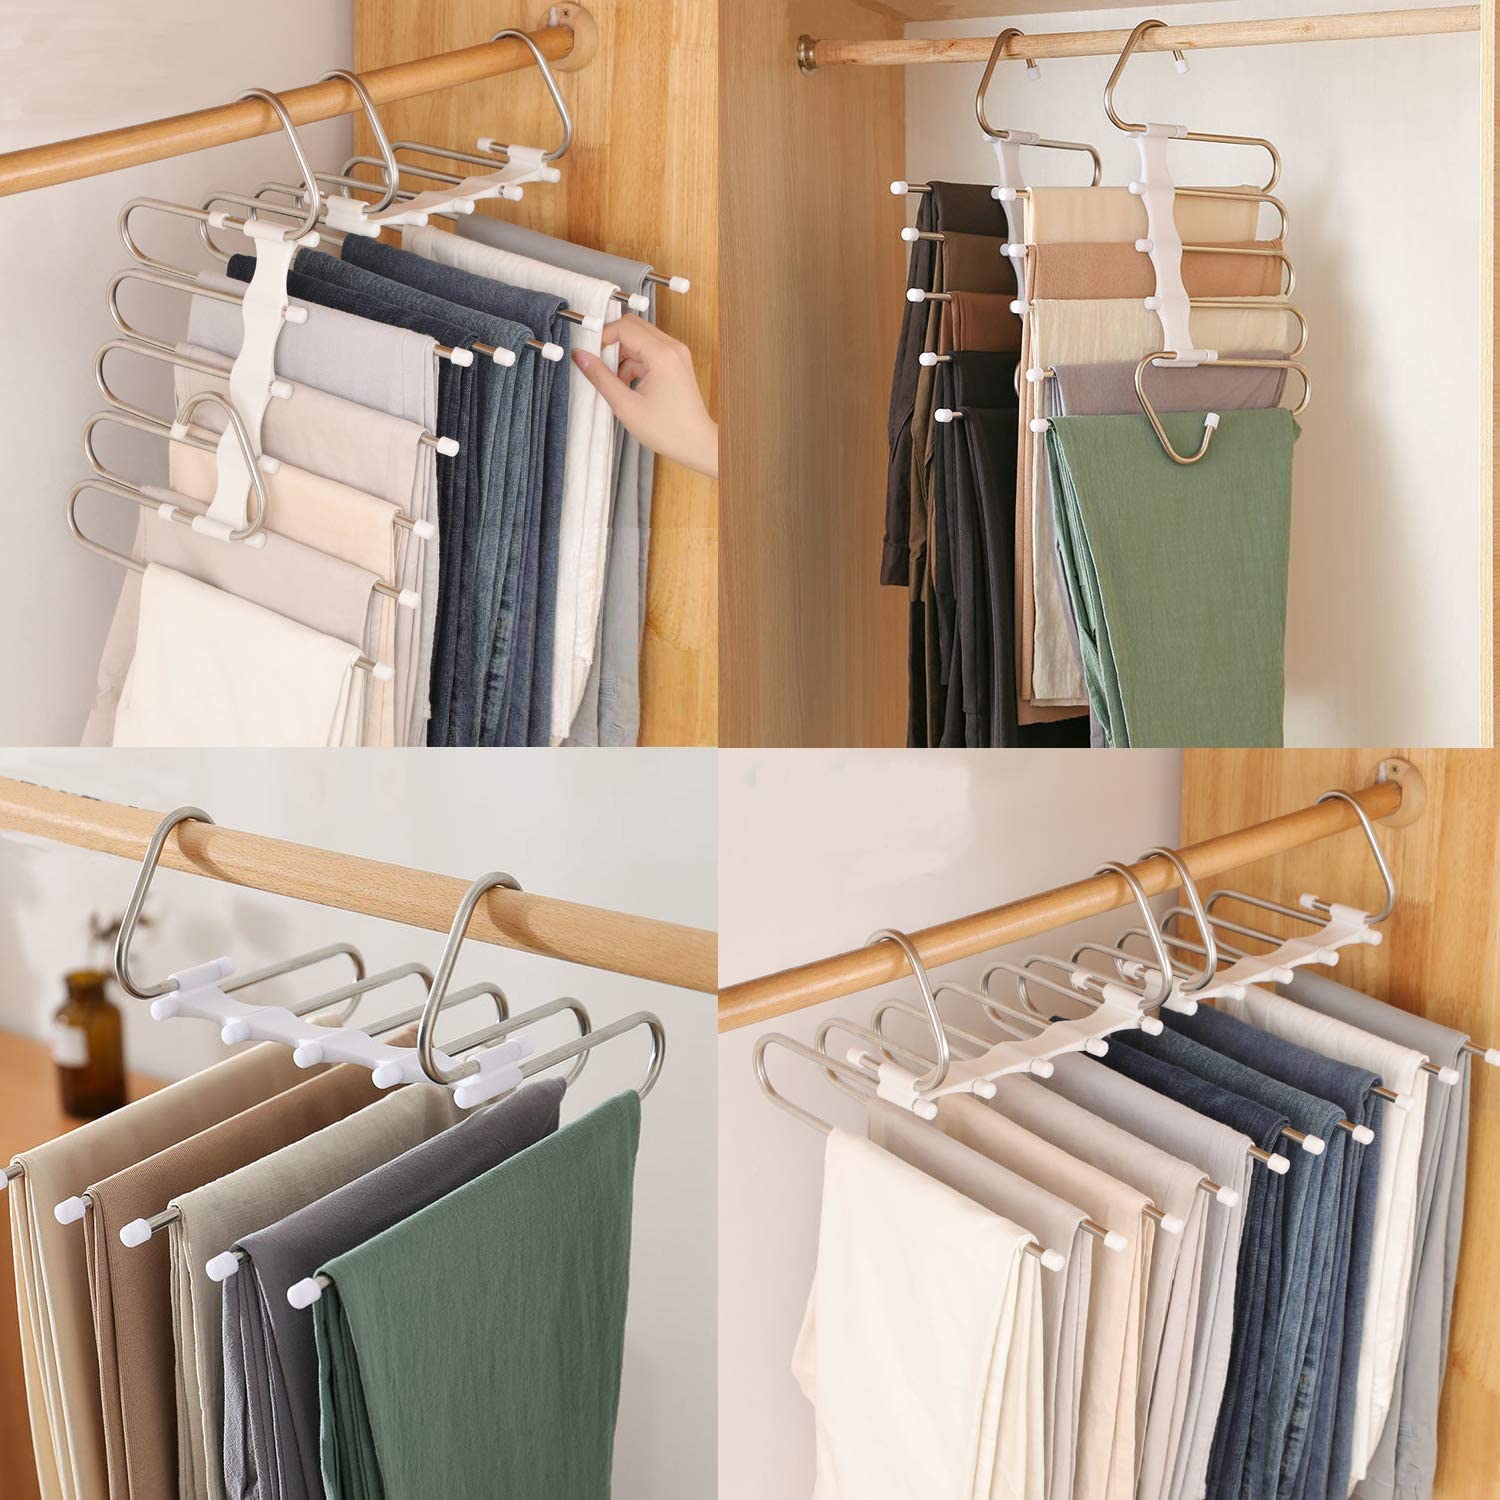 HEAVY DUTY PULL OUT TROUSERS PANTS HANGER TIE RACK CLOSET WARDROBE 22 Arms  | eBay